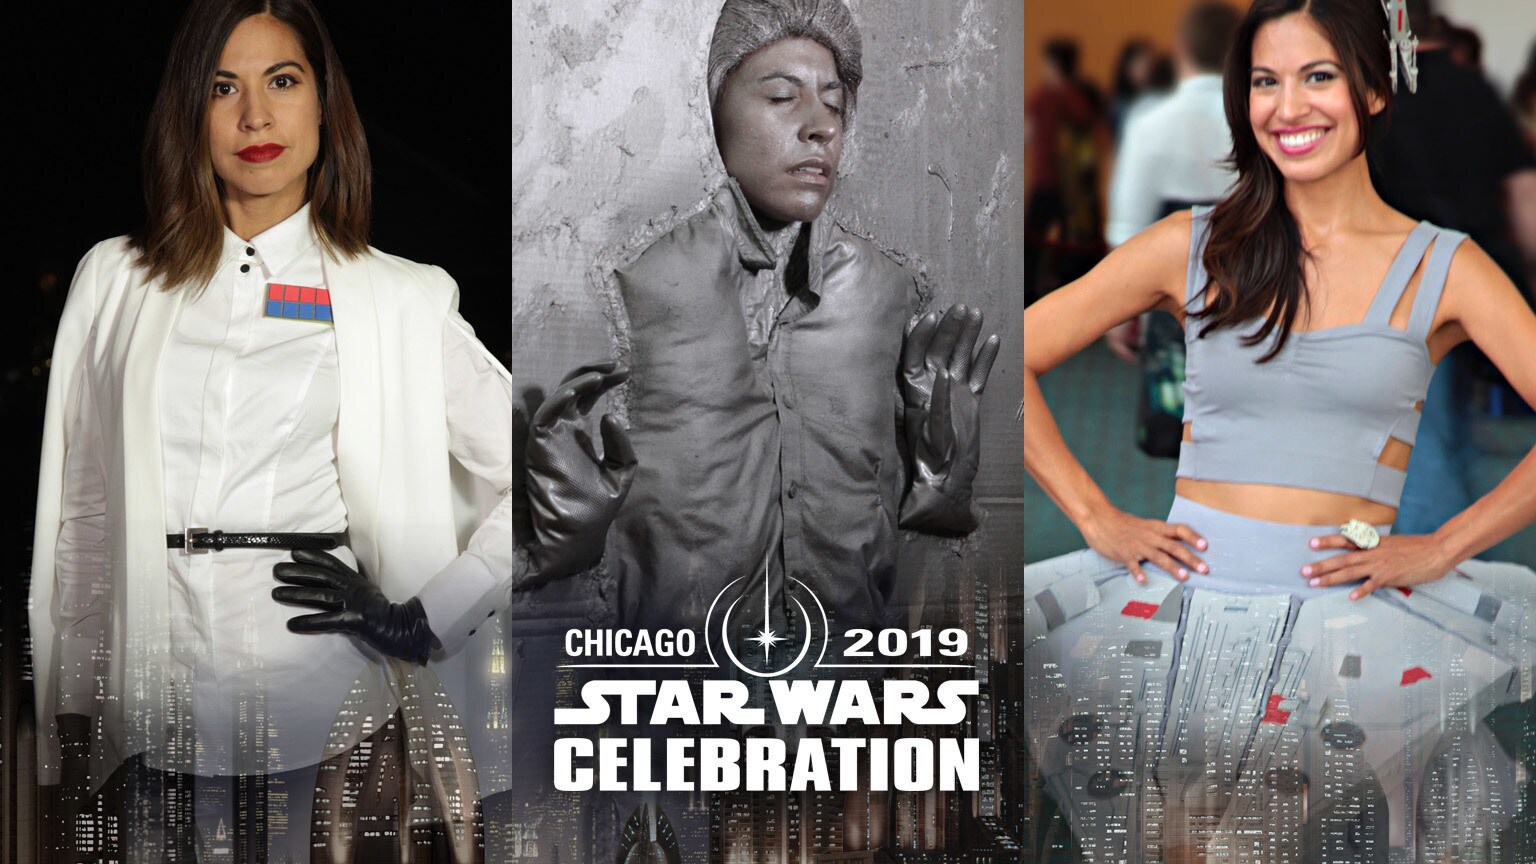 5 Tips for Perfecting Your Cosplay for Star Wars Celebration Chicago